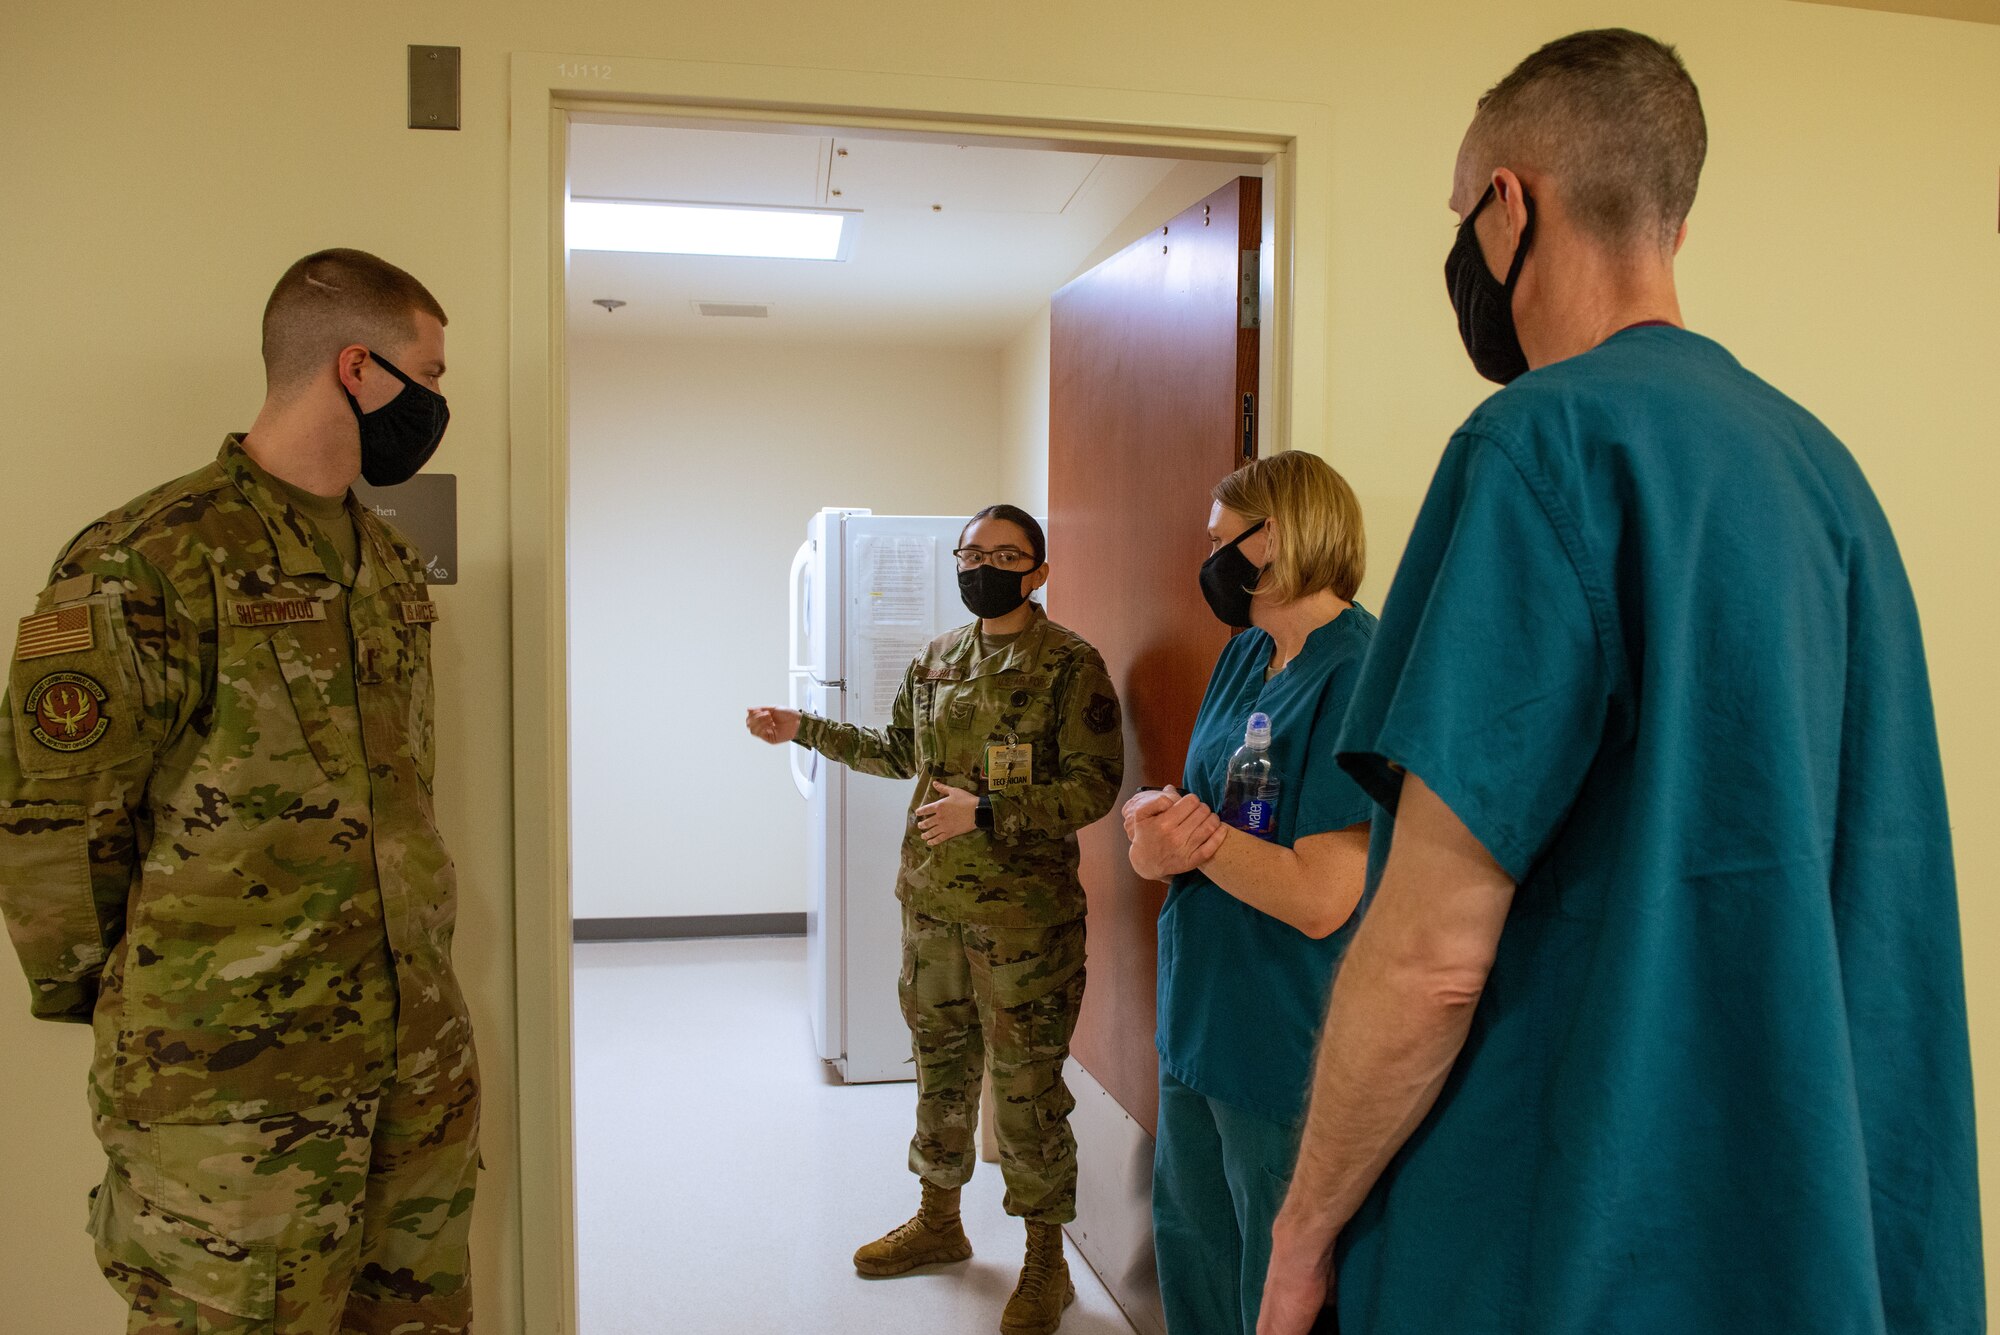 U.S. Air Force Airman 1st Class Jaqueline Rocha, second from left, 673d Inpatient Operations Squadron mental health technician, and 2nd Lt. John Sherwood, left, 673d IPTS mental health nurse, brief U.S. Air Force Col. Kirsten Aguilar, second from right, Joint Base Elmendorf-Richardson and 673d Air Base Wing commander, and U.S. Air Force Chief Master Sgt. Lee Mills, JBER and 673d ABW command chief, during a 673d IPTS immersion at JBER, Alaska, Feb. 26, 2021. The tour familiarized base leadership with the 673d IPTS and its role in supporting readiness. The 673d IPTS provides a full range of medical care to include perinatal care, intensive care, and behavioral health services to JBER and the greater Anchorage area.